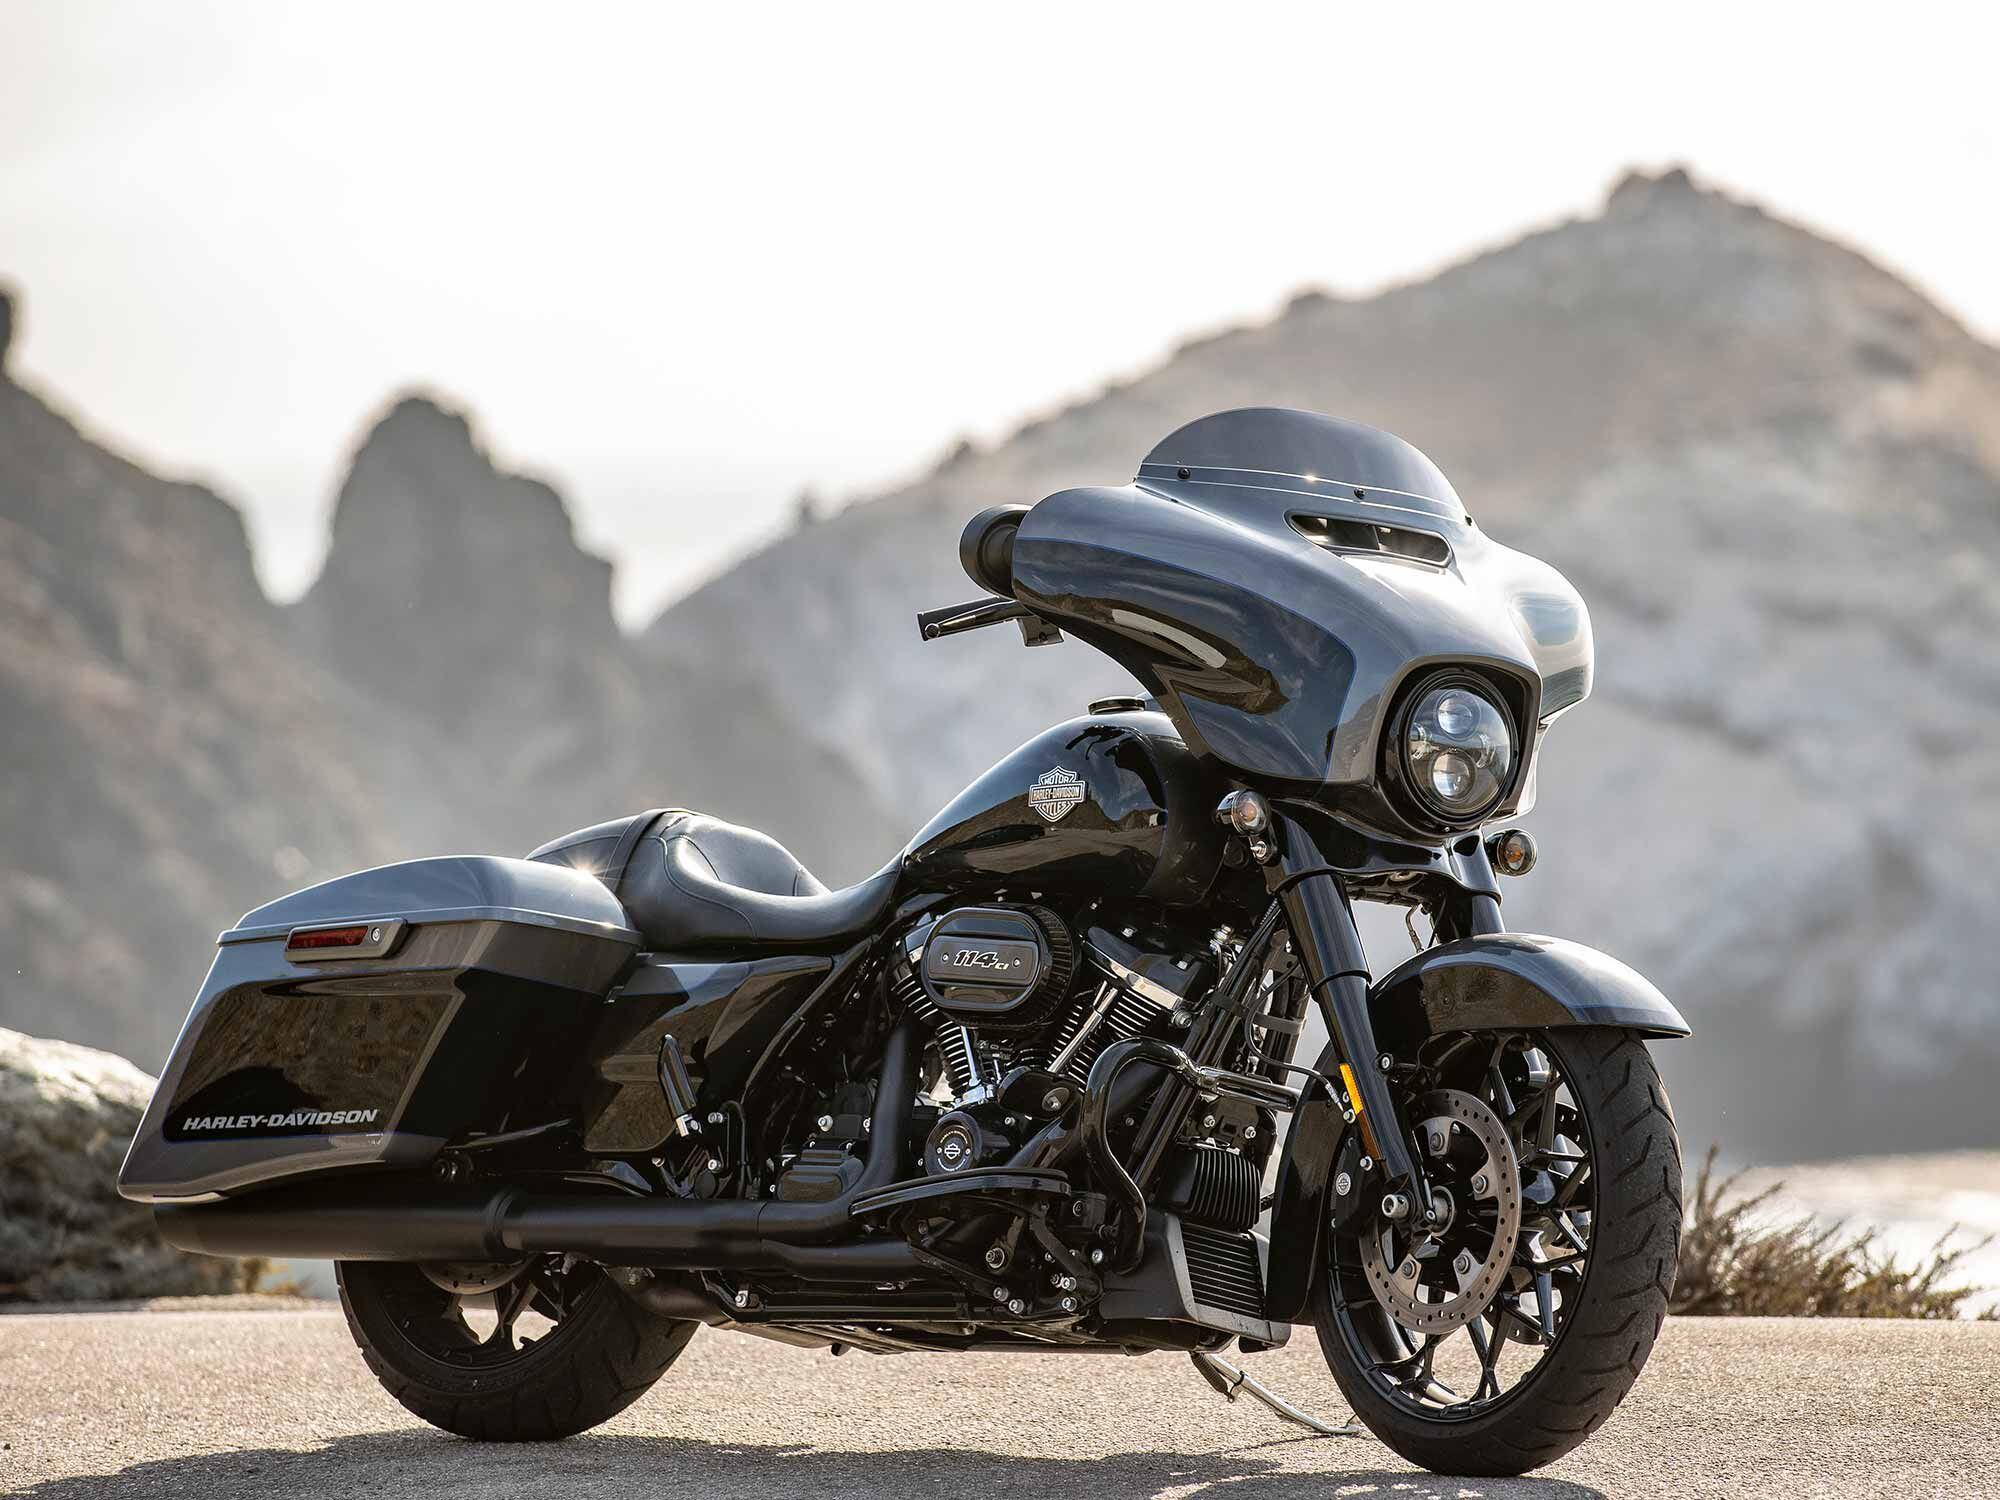 The 2021 H-D Street Glide Special is seen here in Gauntlet Gray Metallic/Vivid Black, which is available with black or chrome engine finishes.